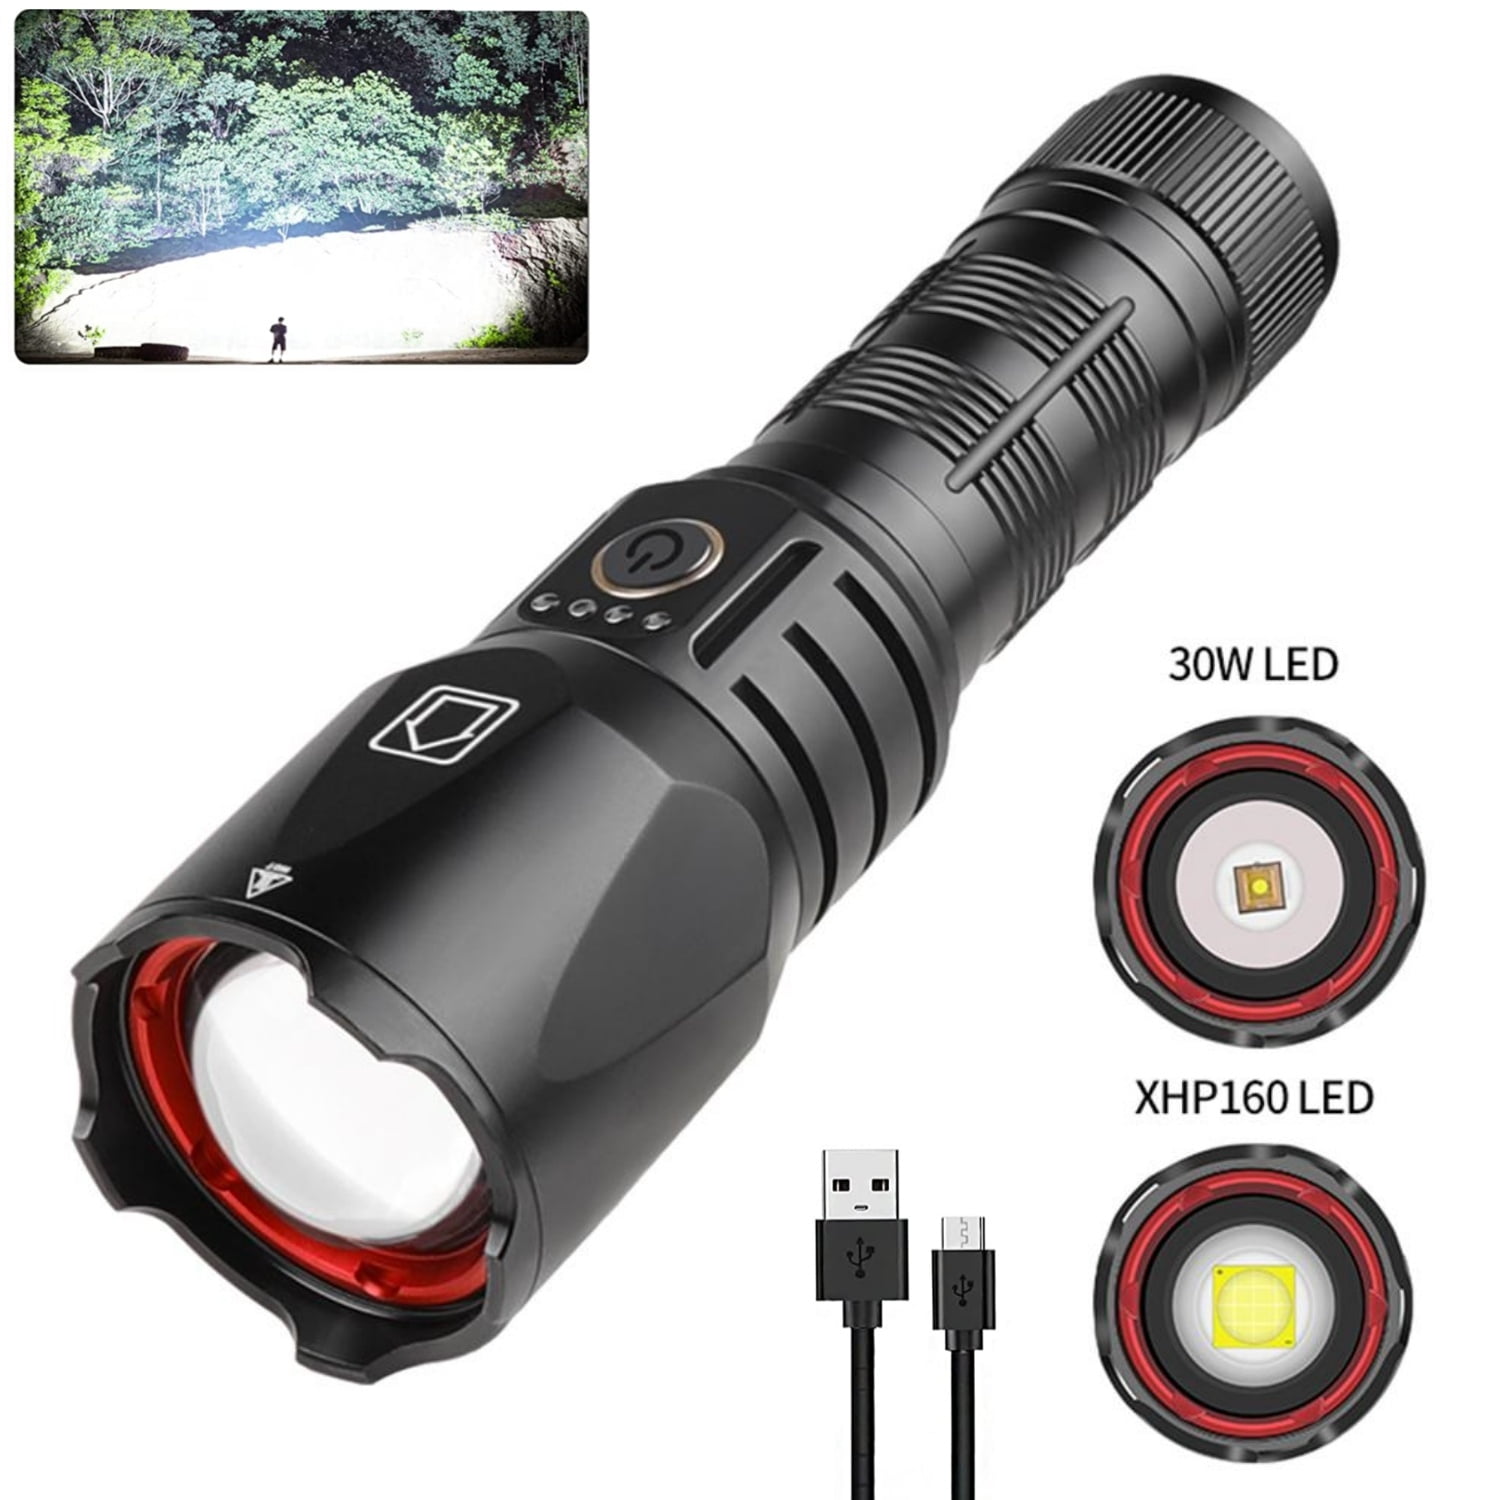 High-power 300W 3000m Shot LED Rechargeable Flashlight Lamp XHP160 Beads  Portable Torch 5 Lighting Modes Zoomable Camping Light